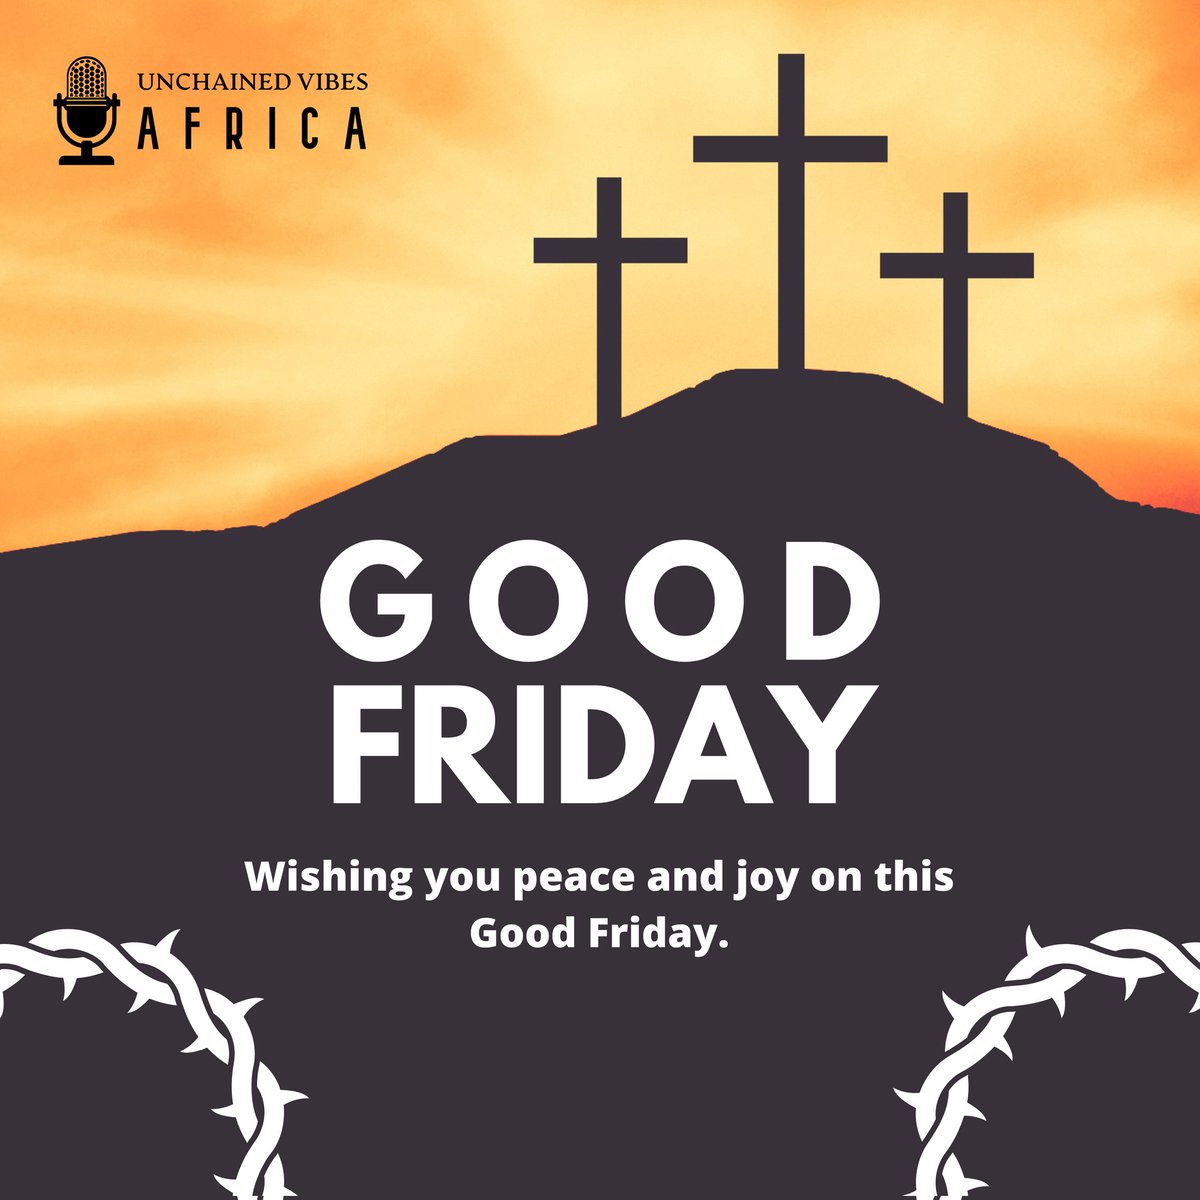 We join all our Christian Vibesfam in acknowledging this day. Happy Good Friday!

#goodfriday #christiancommunity